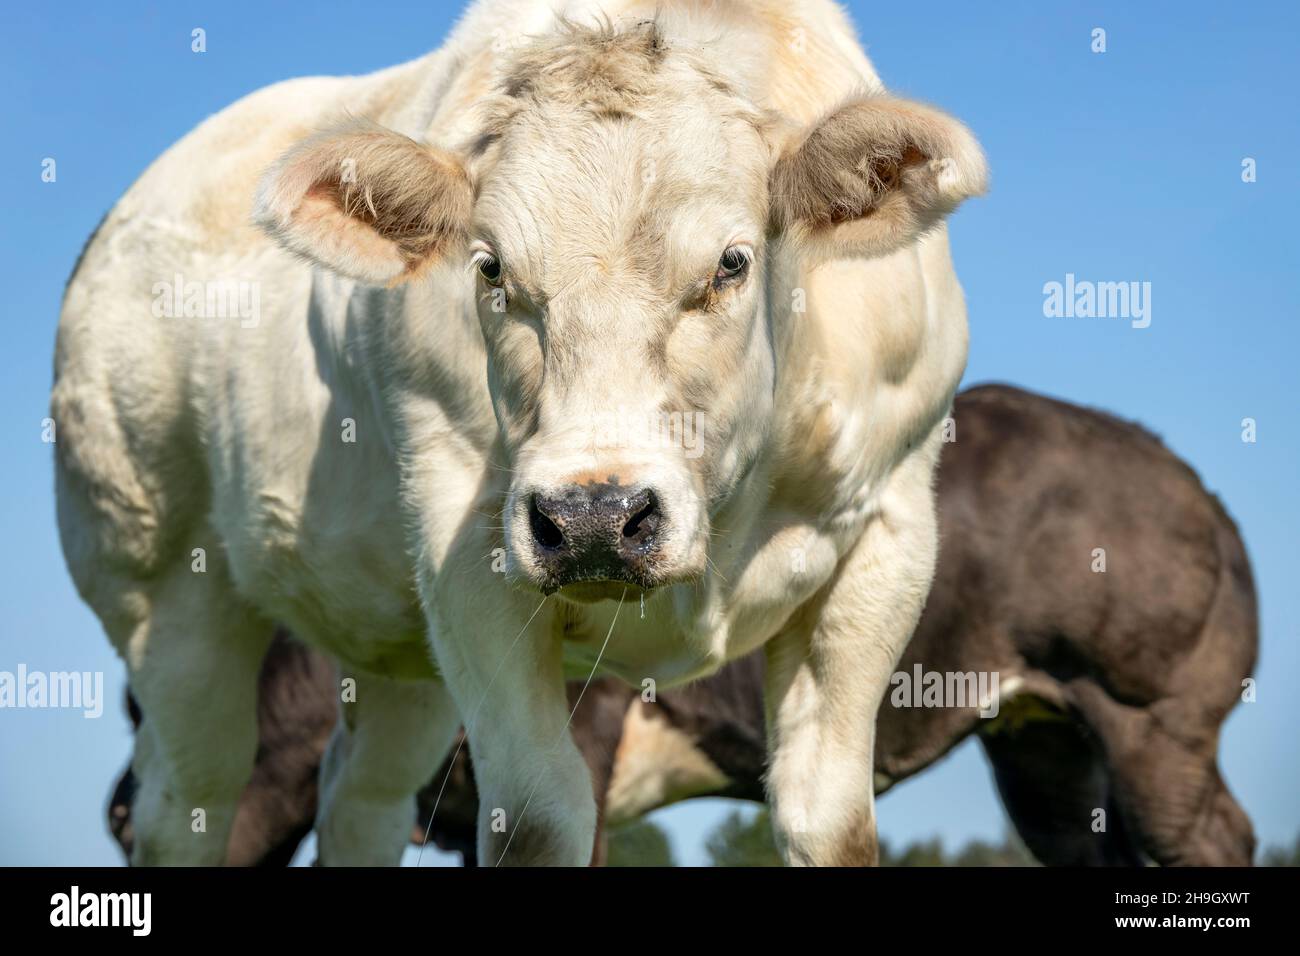 Muscular beef cow, approaching walking towards looking at the camera Stock Photo